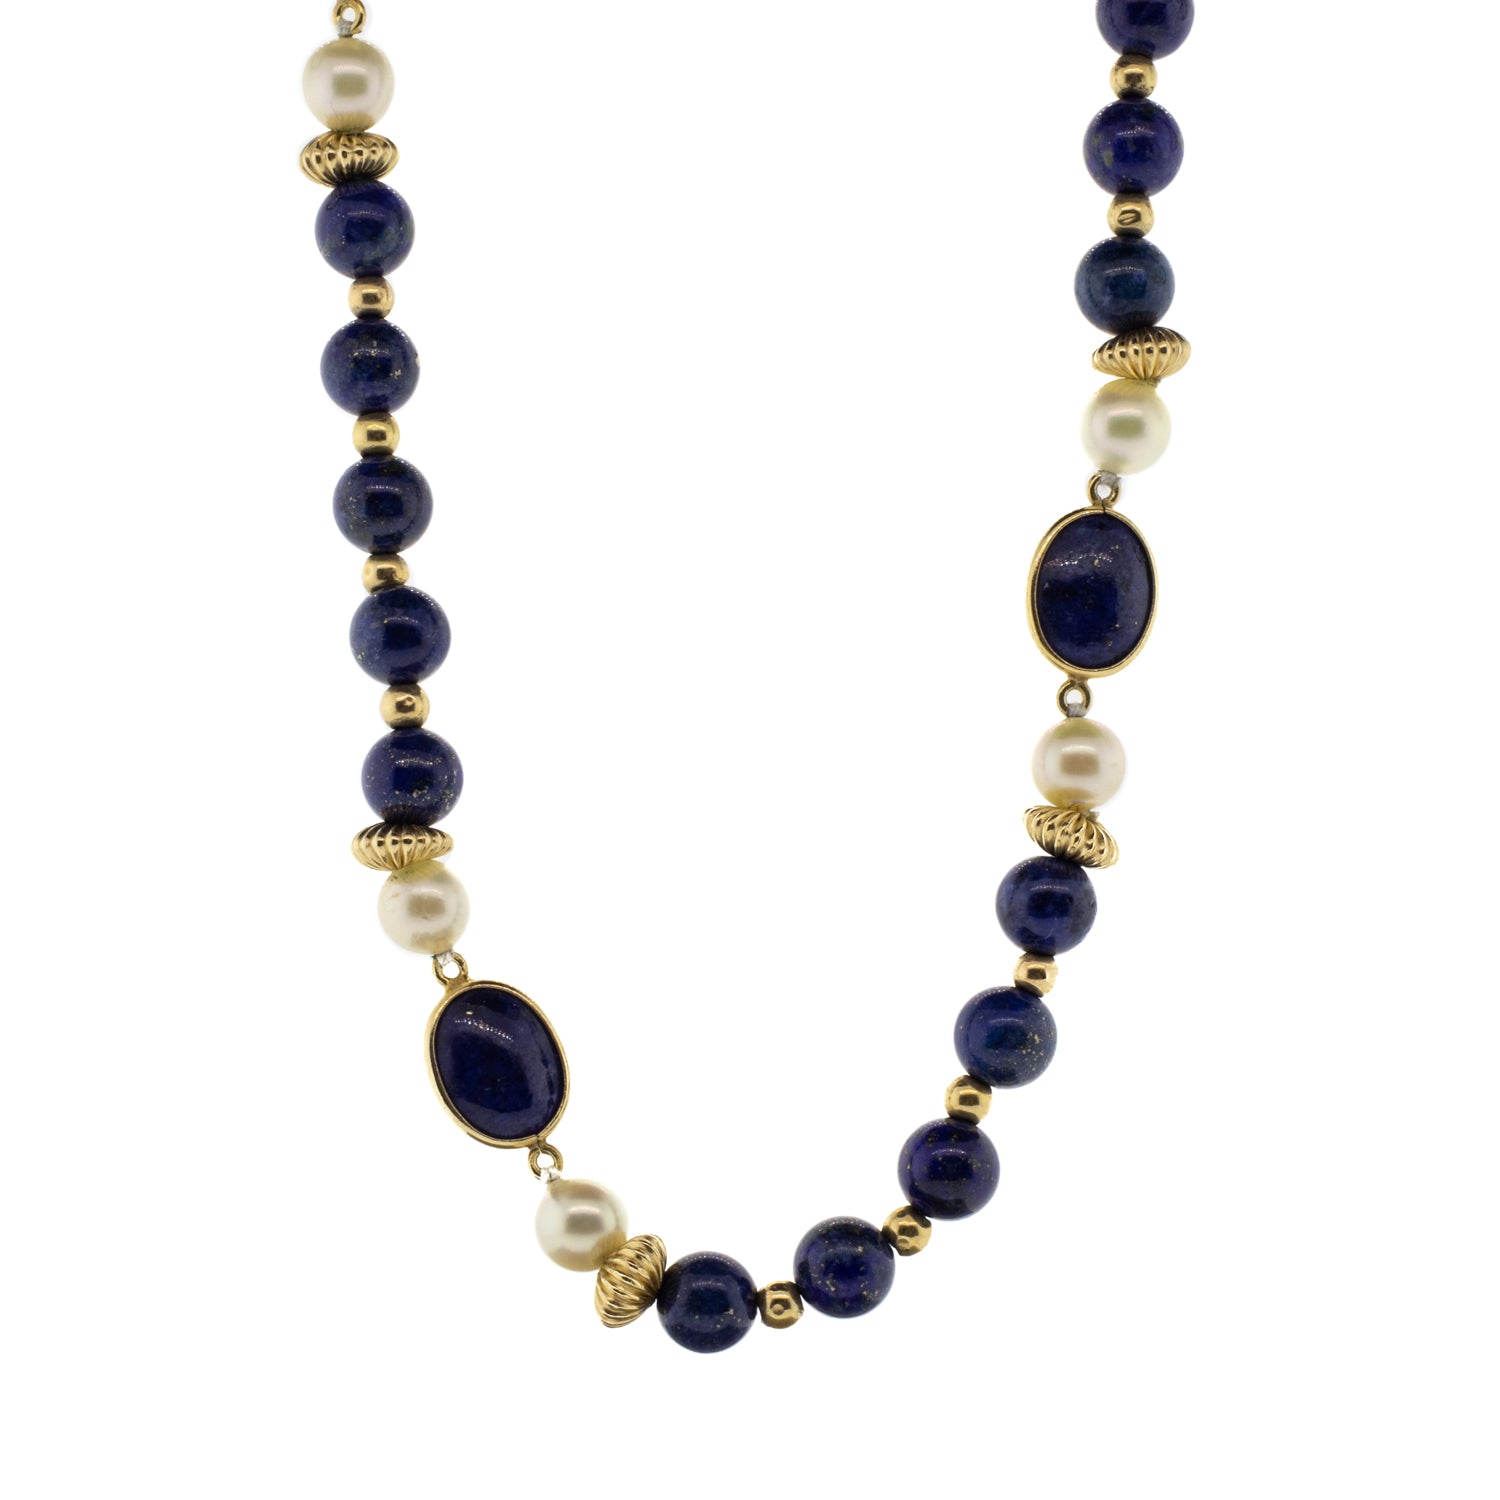 Lapis, Freshwater Pearl and Gold Bead Necklace